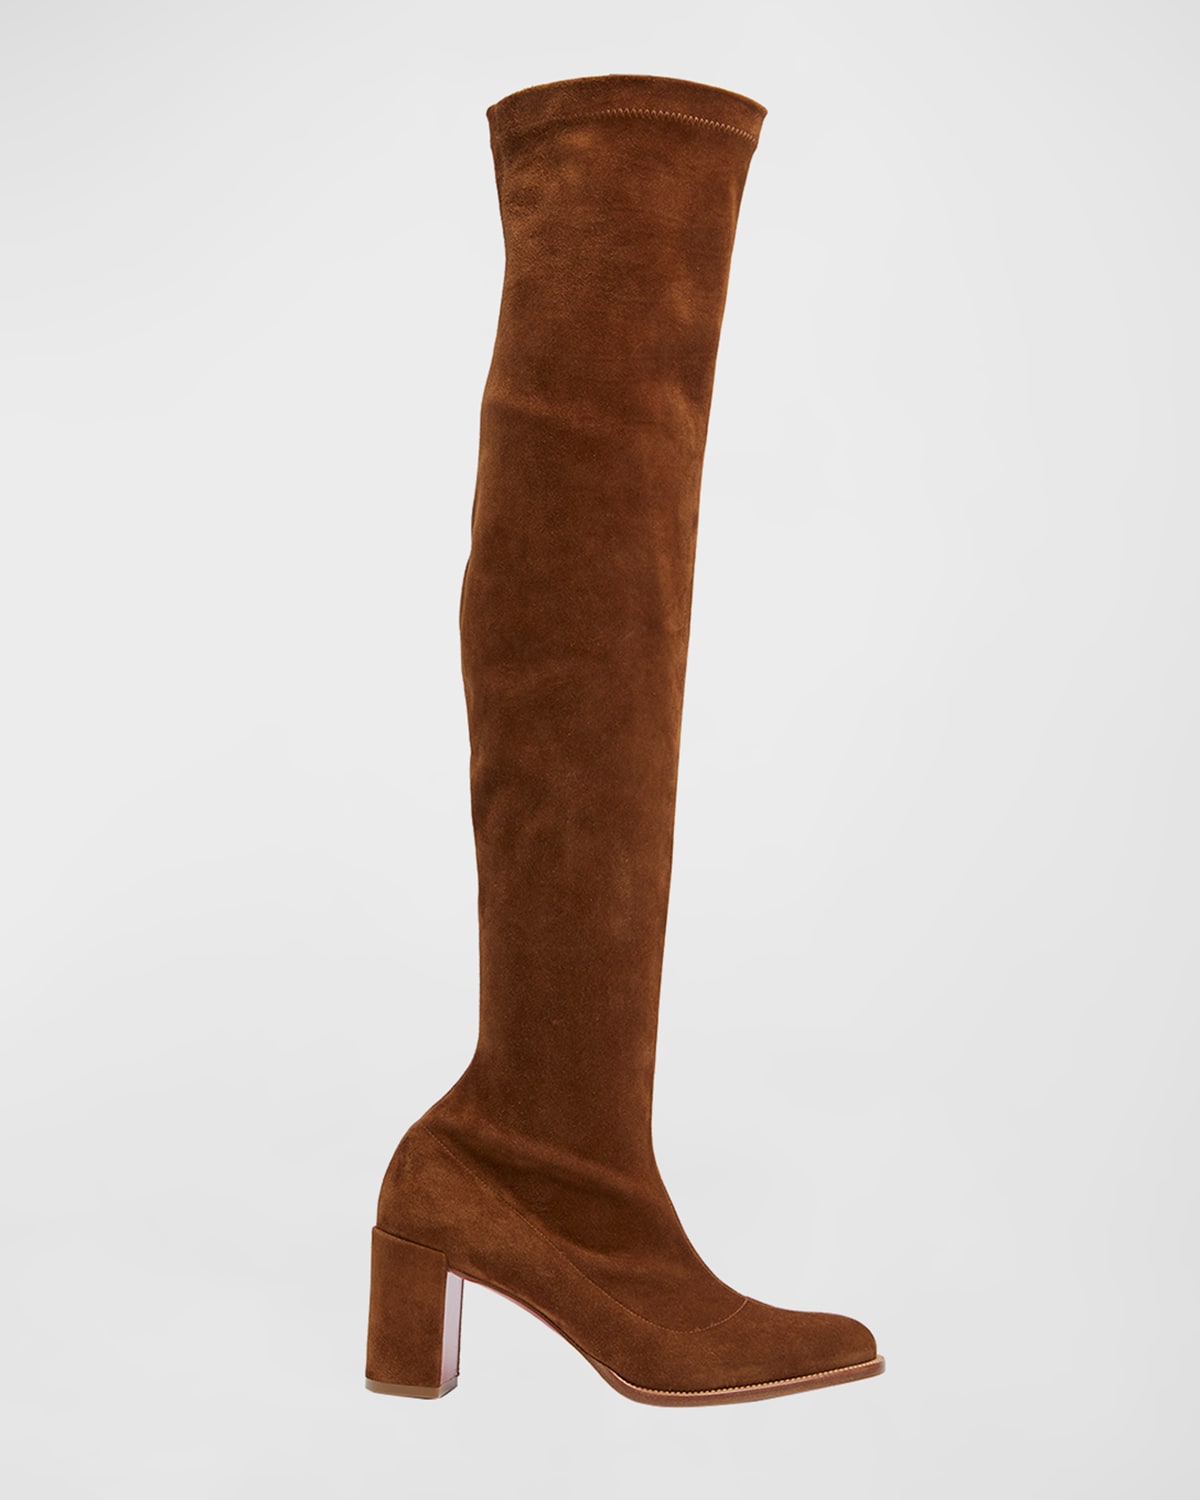 Adoxa Stretch Suede Red-Sole Over-The-Knee Boots